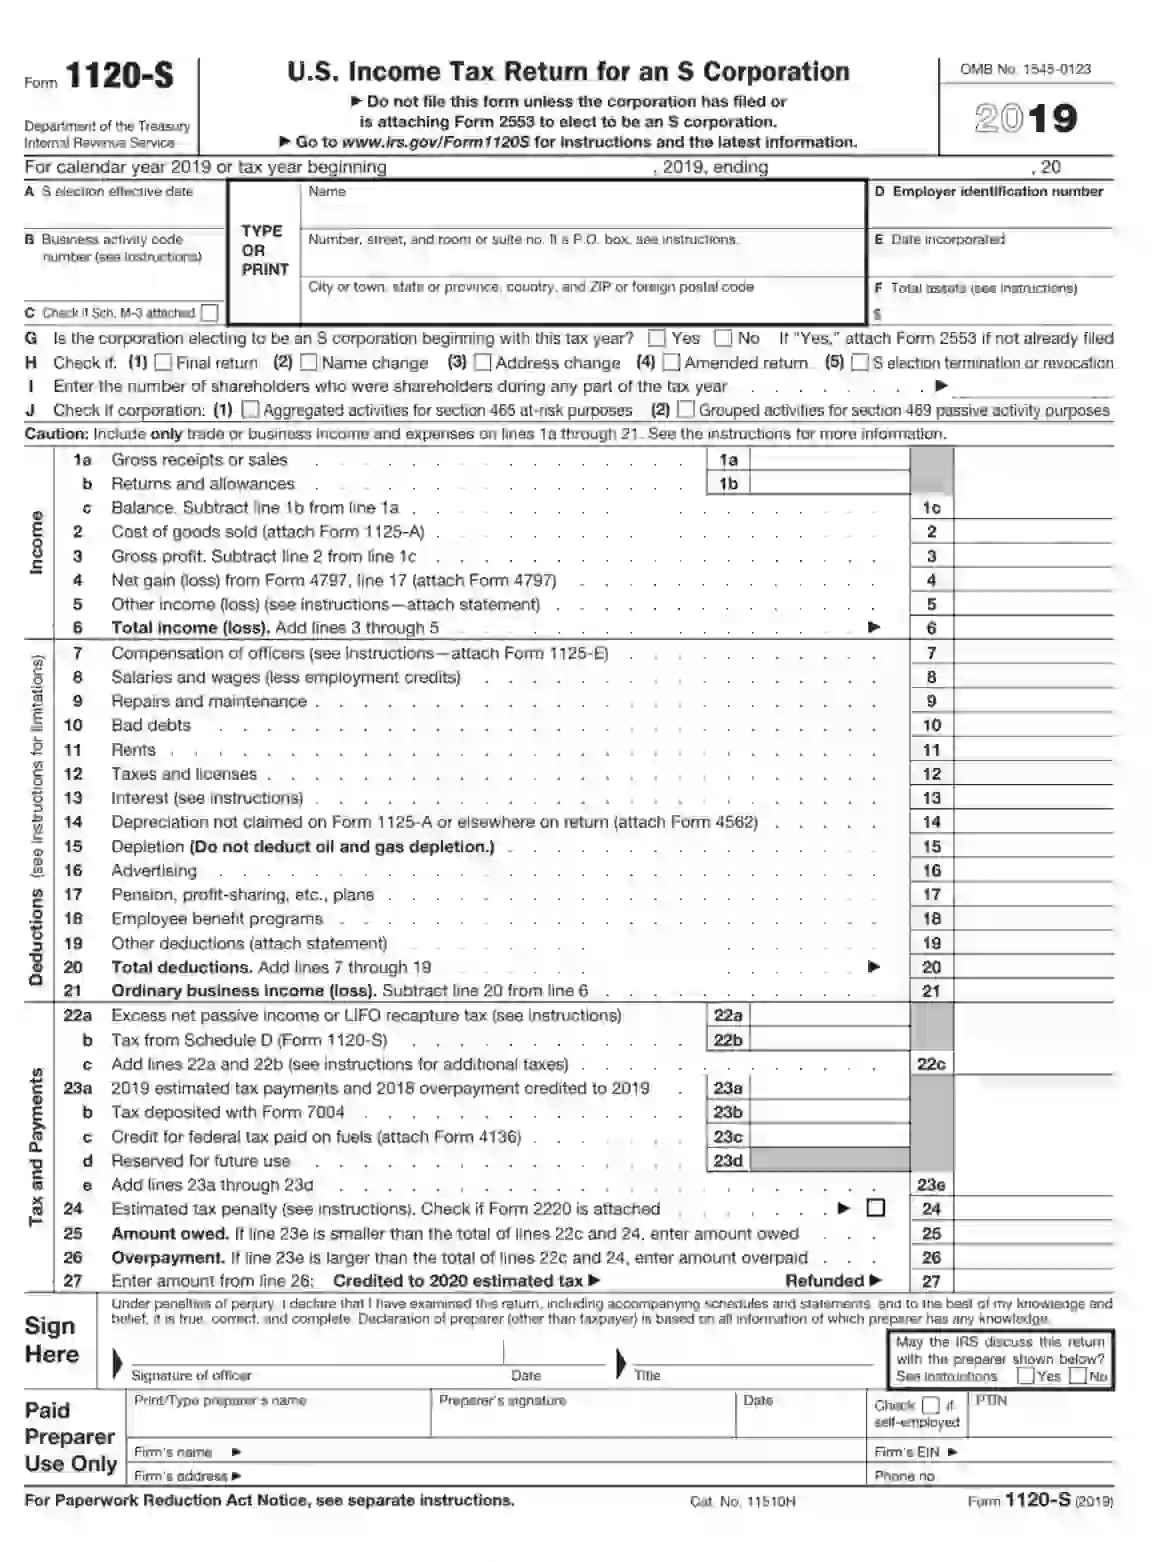 irs form 1120 s